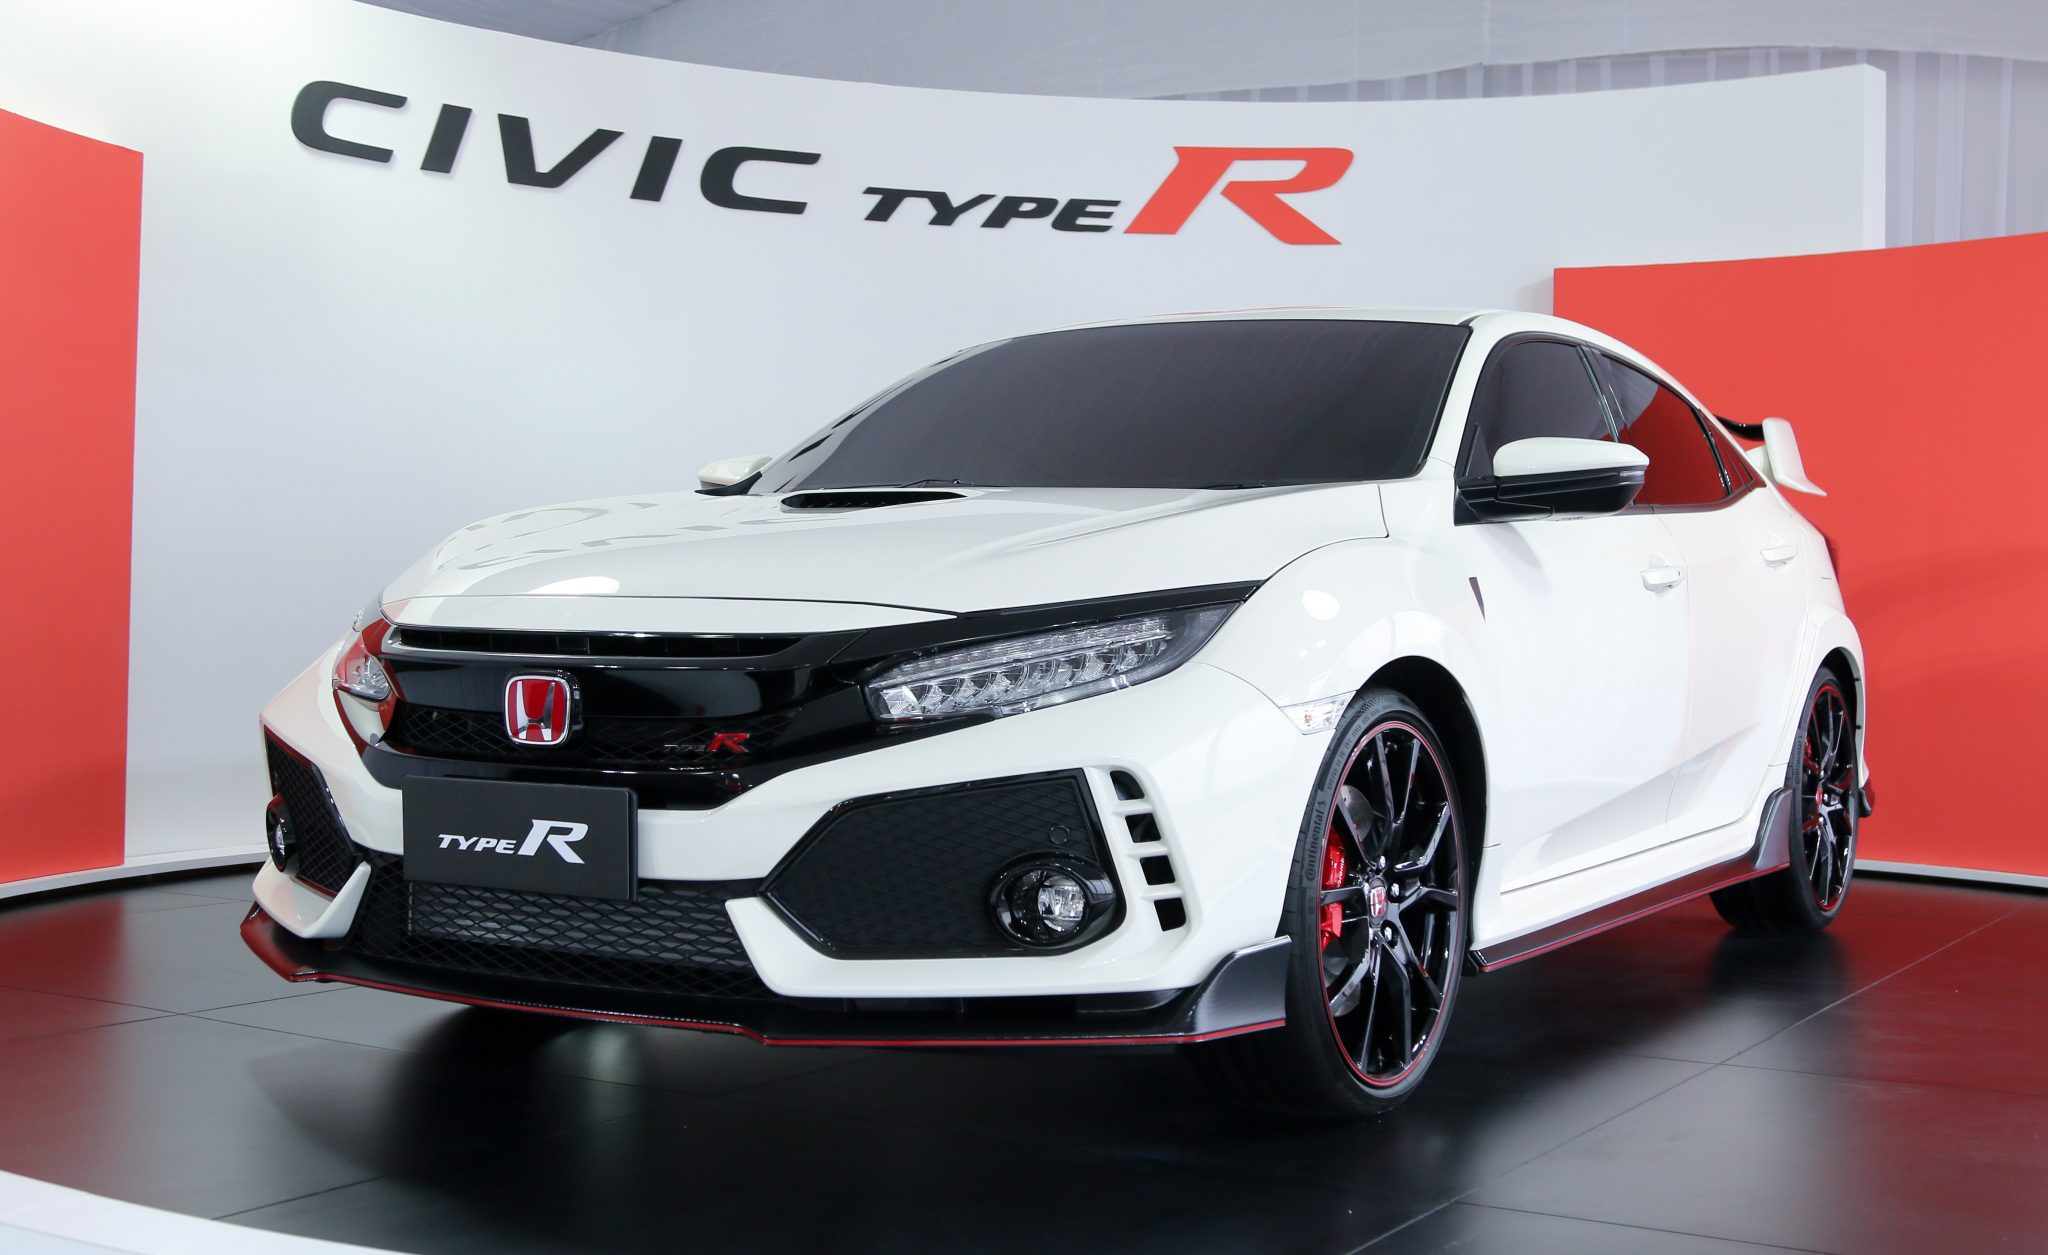 All-New Honda Civic Type-R arrives in Malaysia! - Autofreaks.com